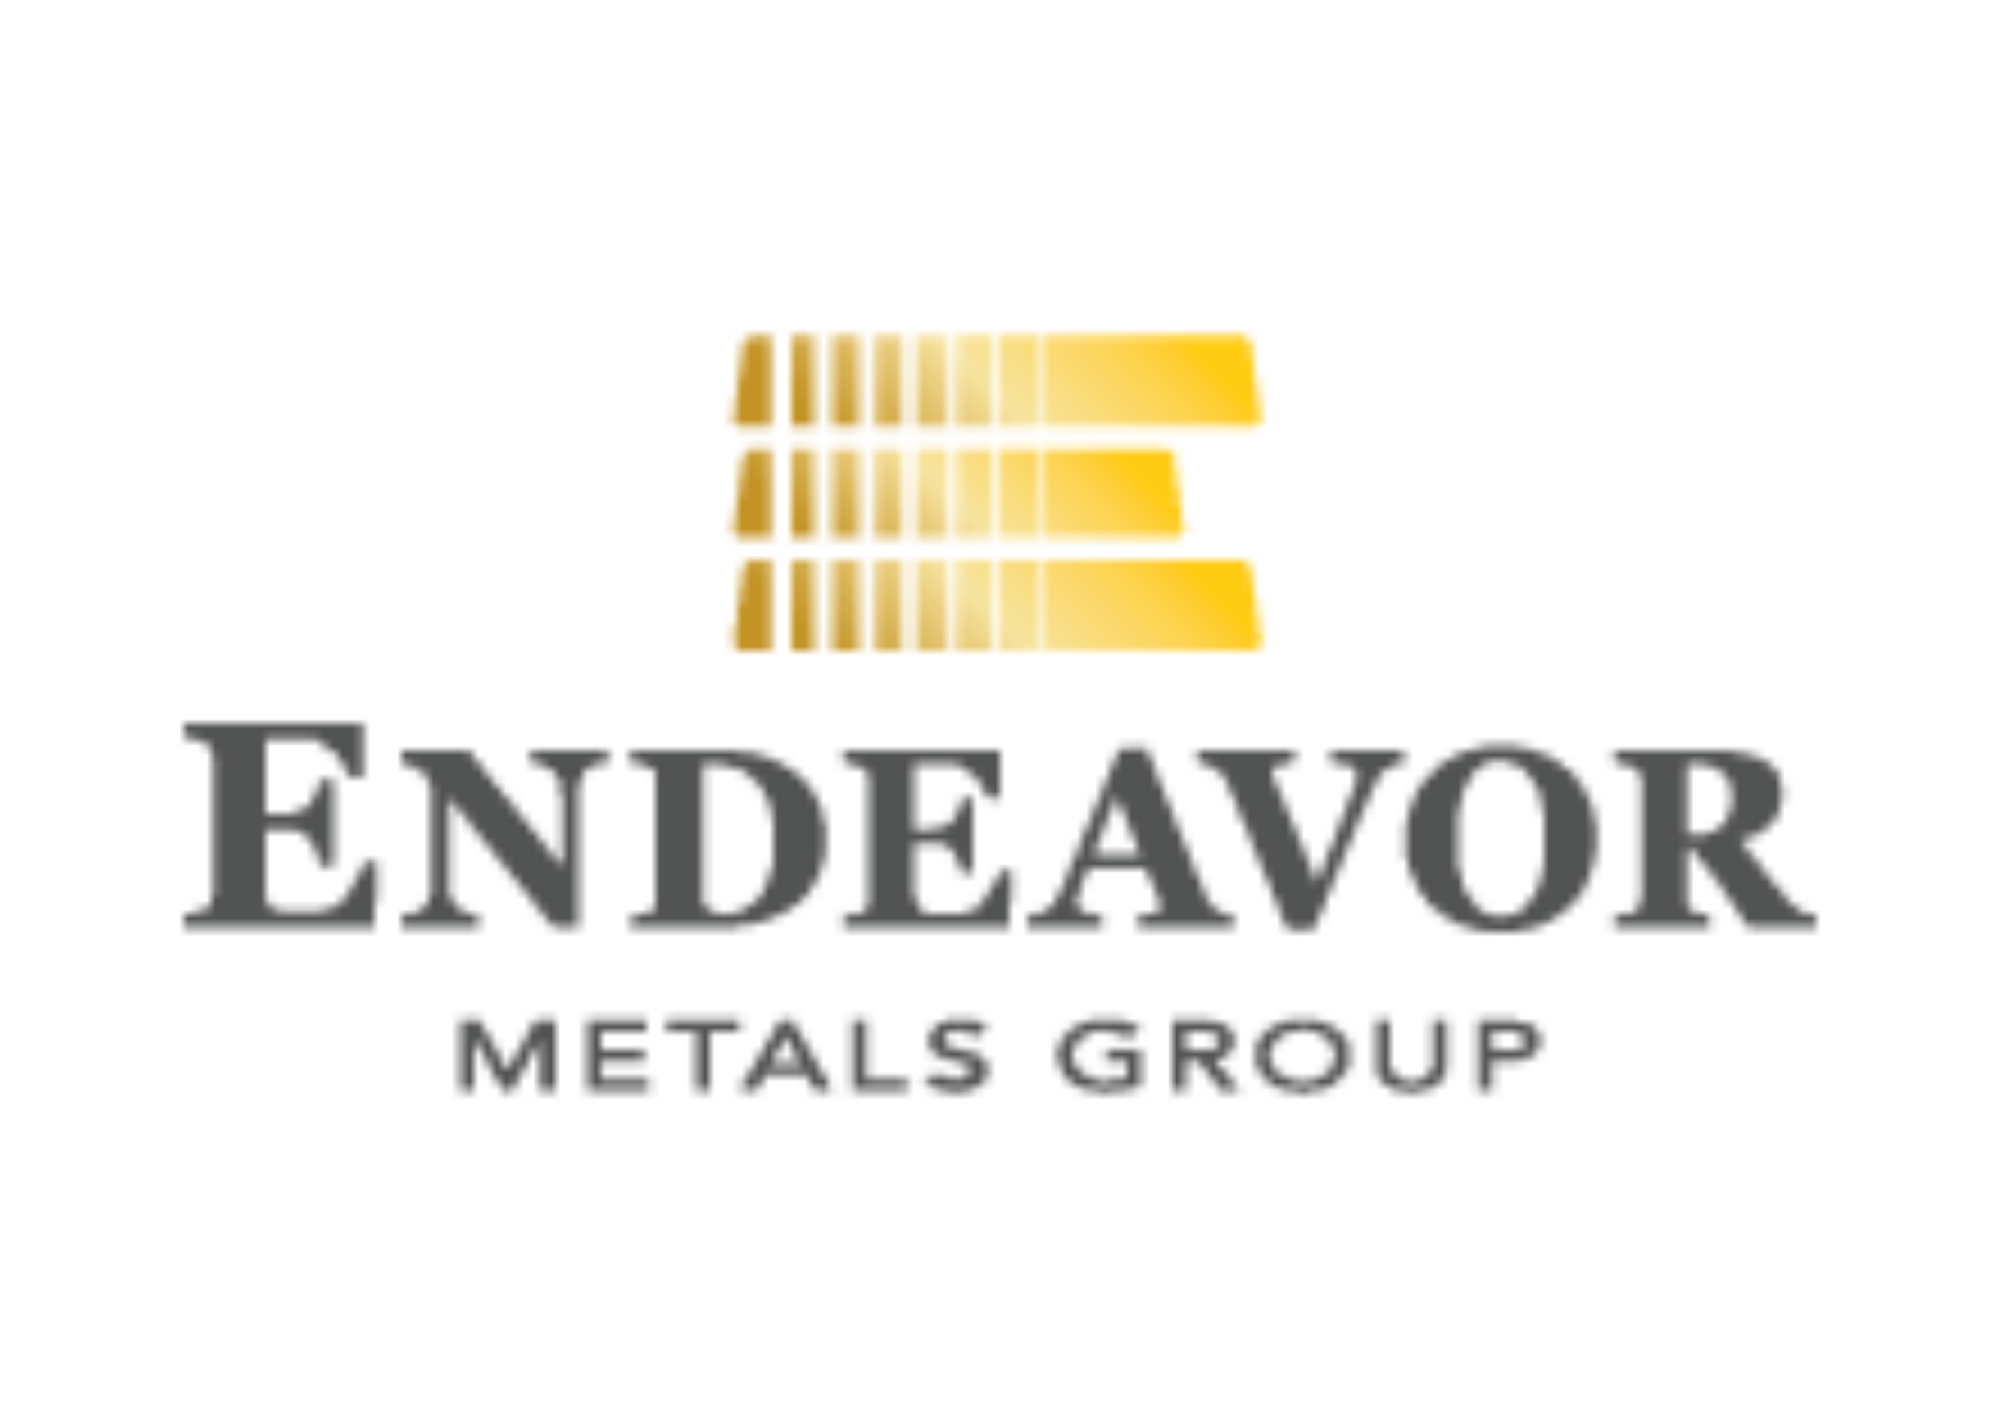 Endeavor Metals Group, Friday, July 29, 2022, Press release picture